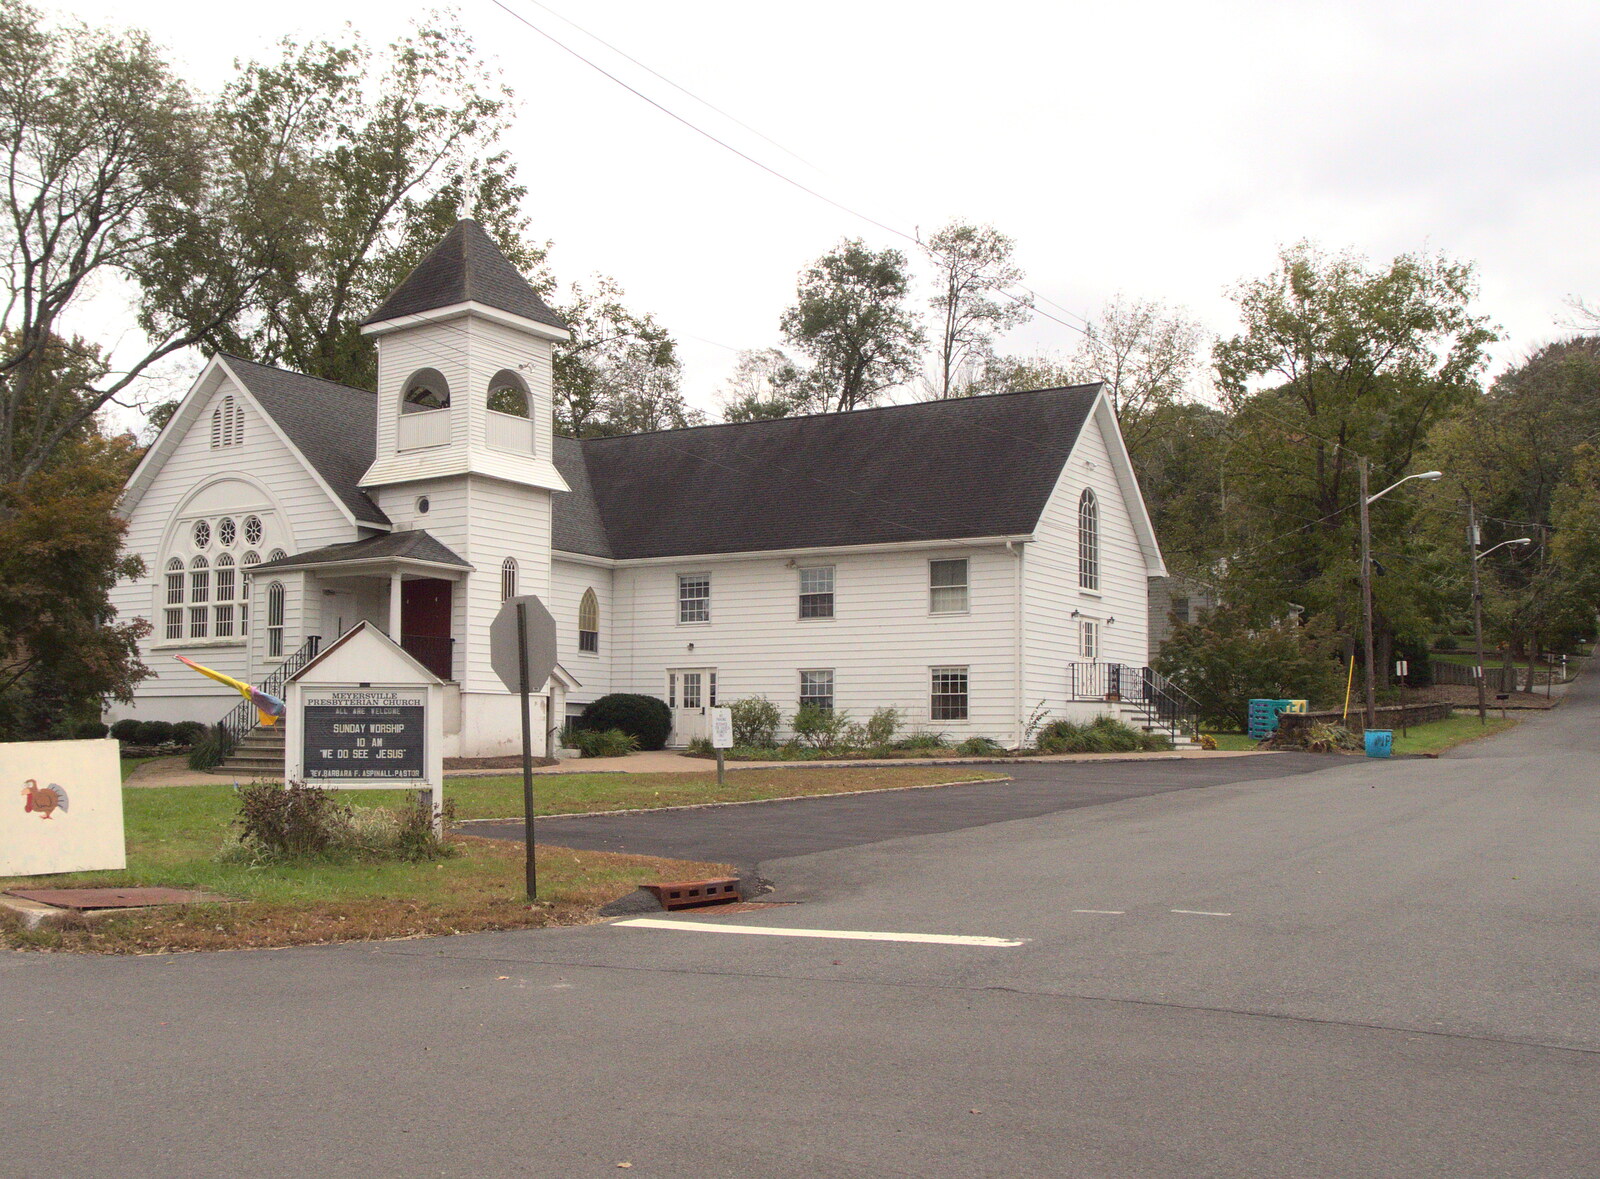 Meyersville Presbyterian Church, near the Swamp from A Trip to Short Hills, New Jersey, United States - 20th October 2018